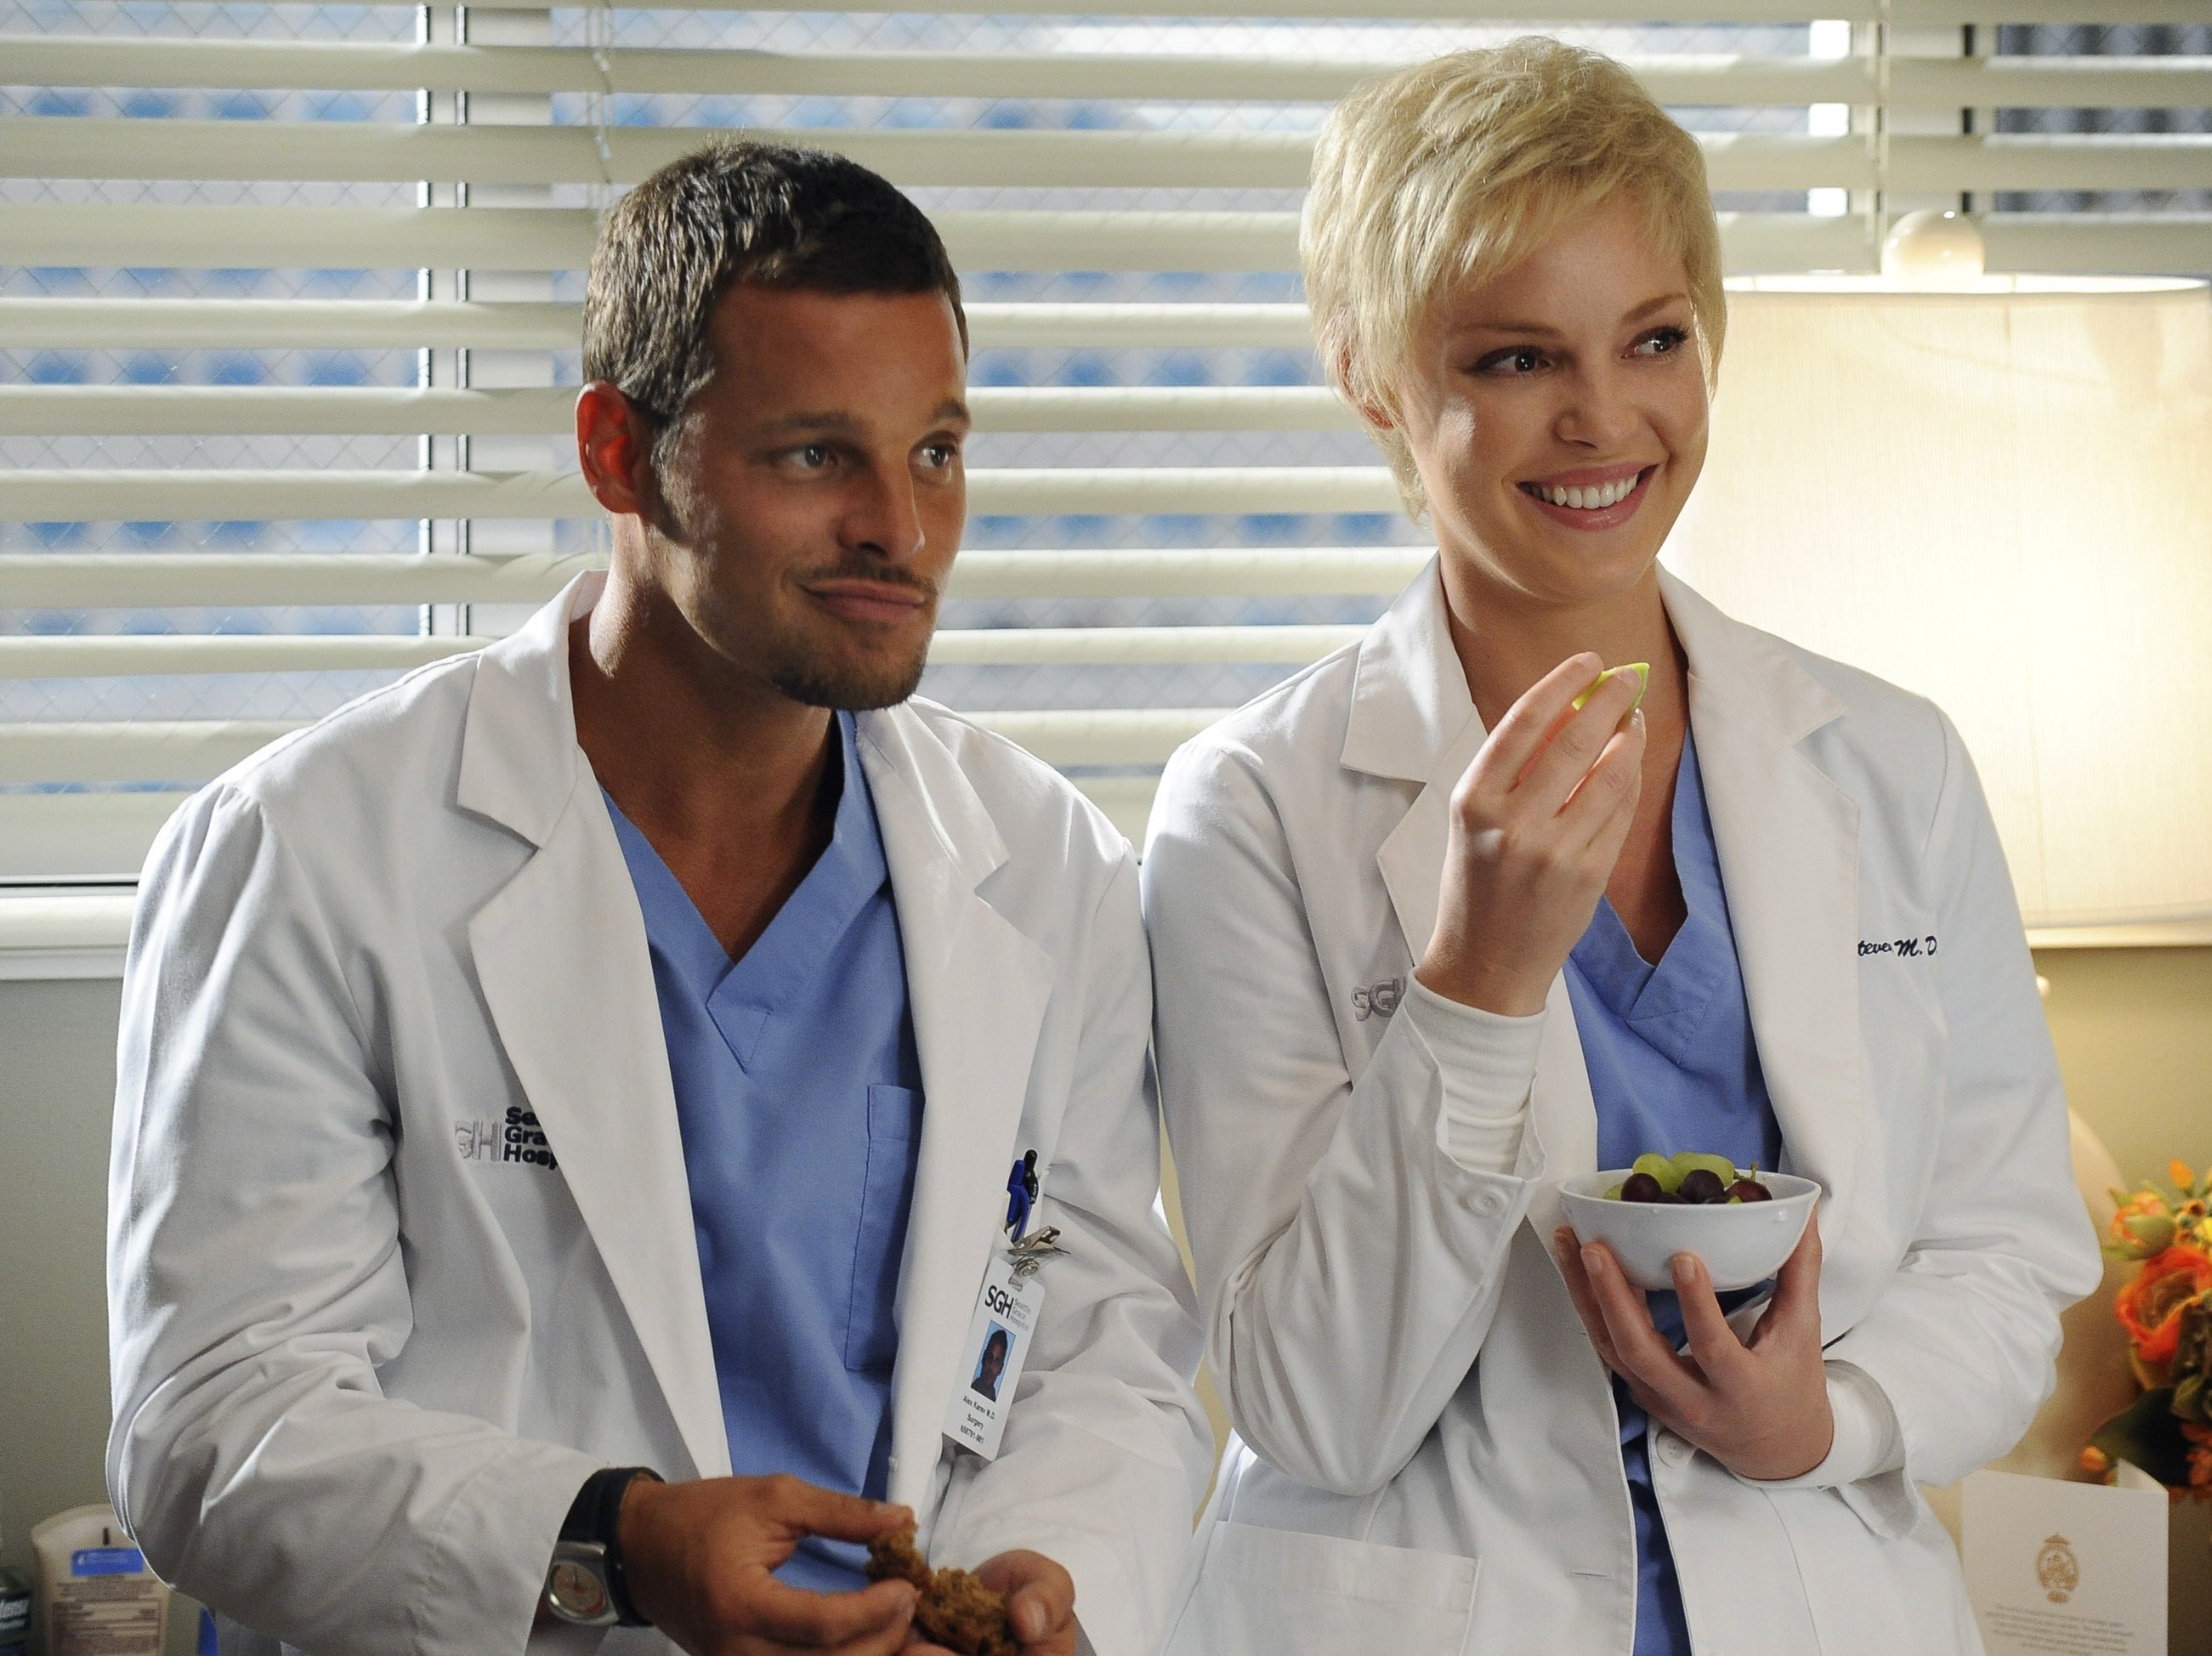 Justin Chambers and Katherine Heigl in Grey’s Anatomy in 2005